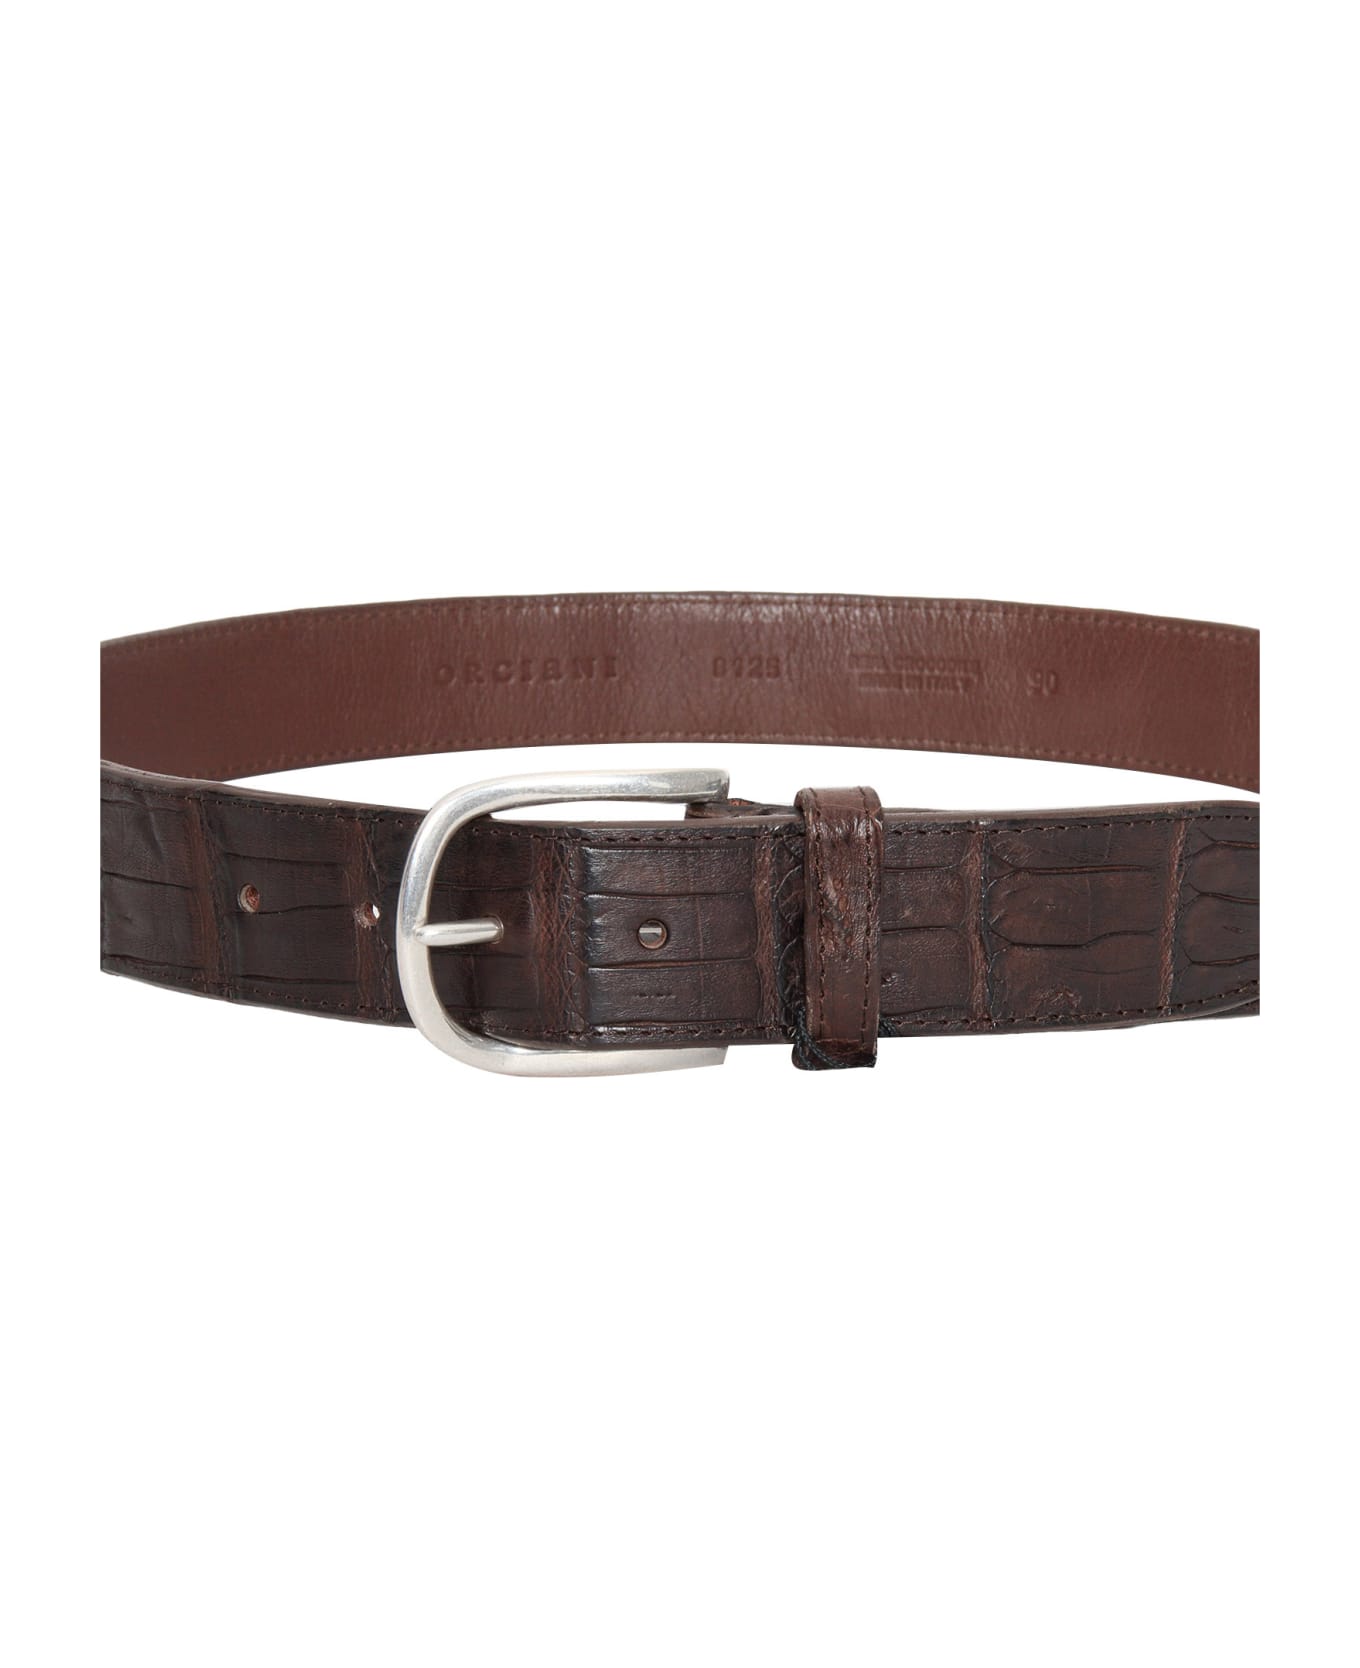 Orciani Classic Cocco Belt - BROWN